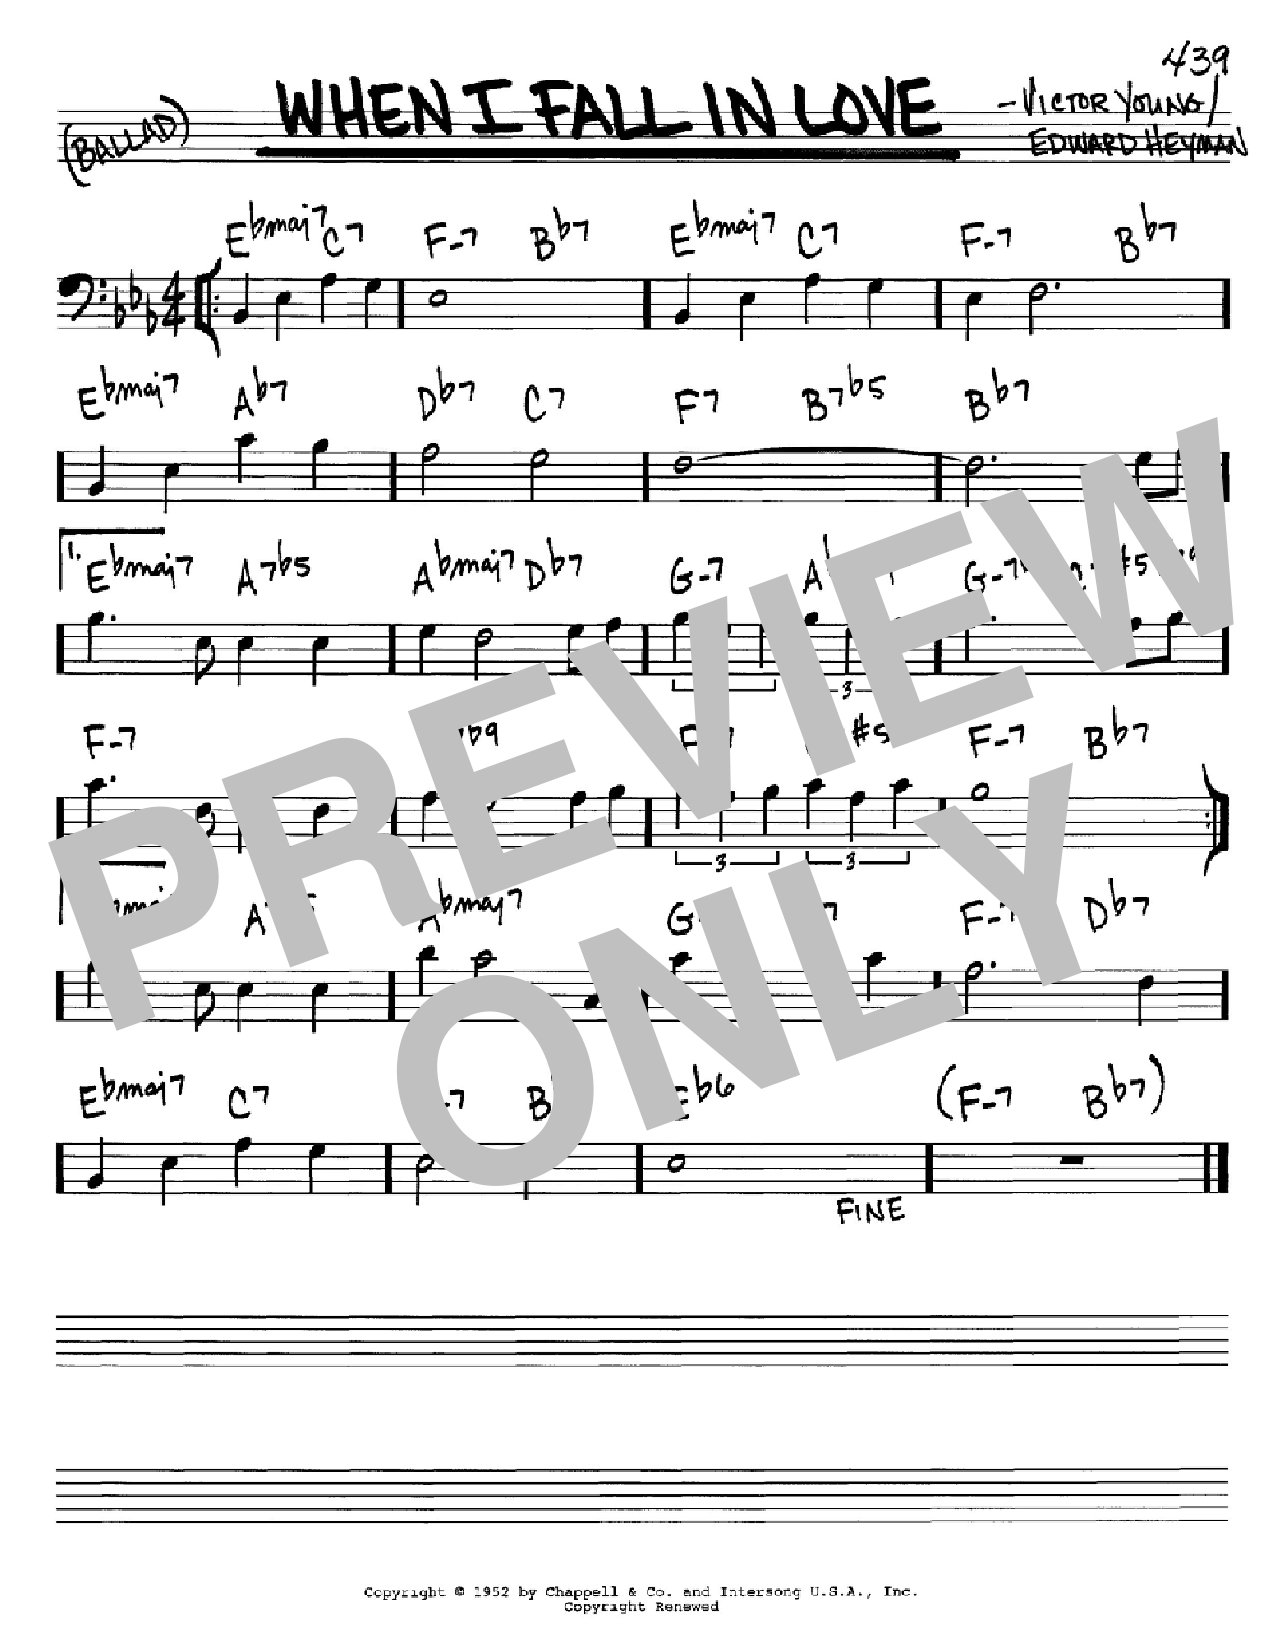 Download Victor Young When I Fall In Love Sheet Music